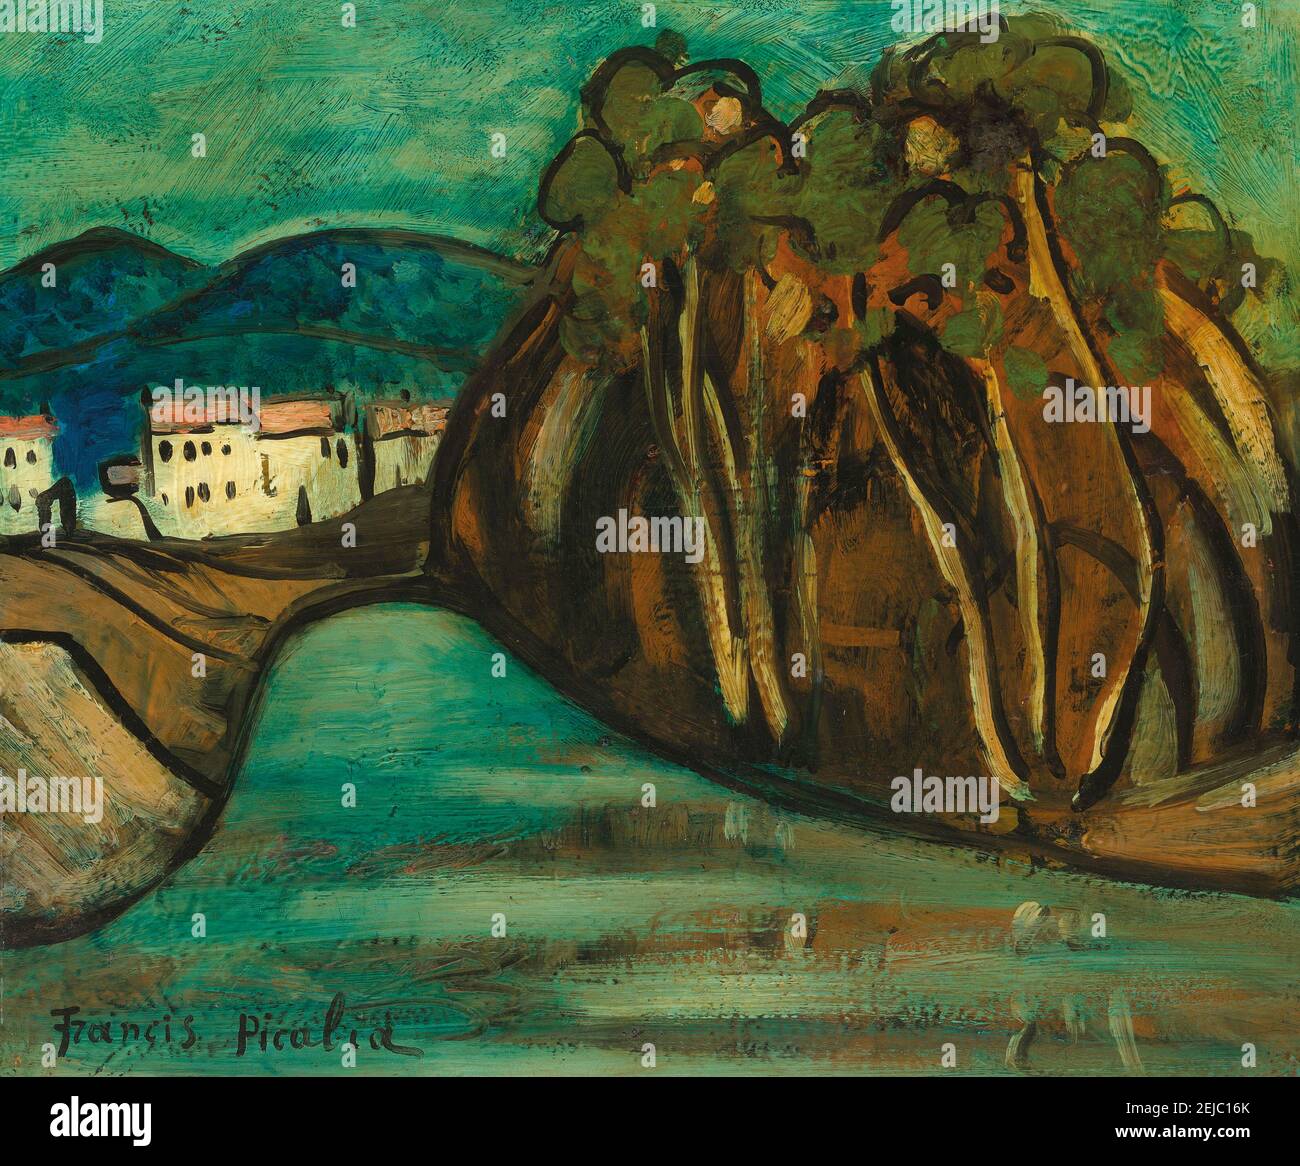 Landscape. Museum: PRIVATE COLLECTION. Author: FRANCIS PICABIA. Stock Photo